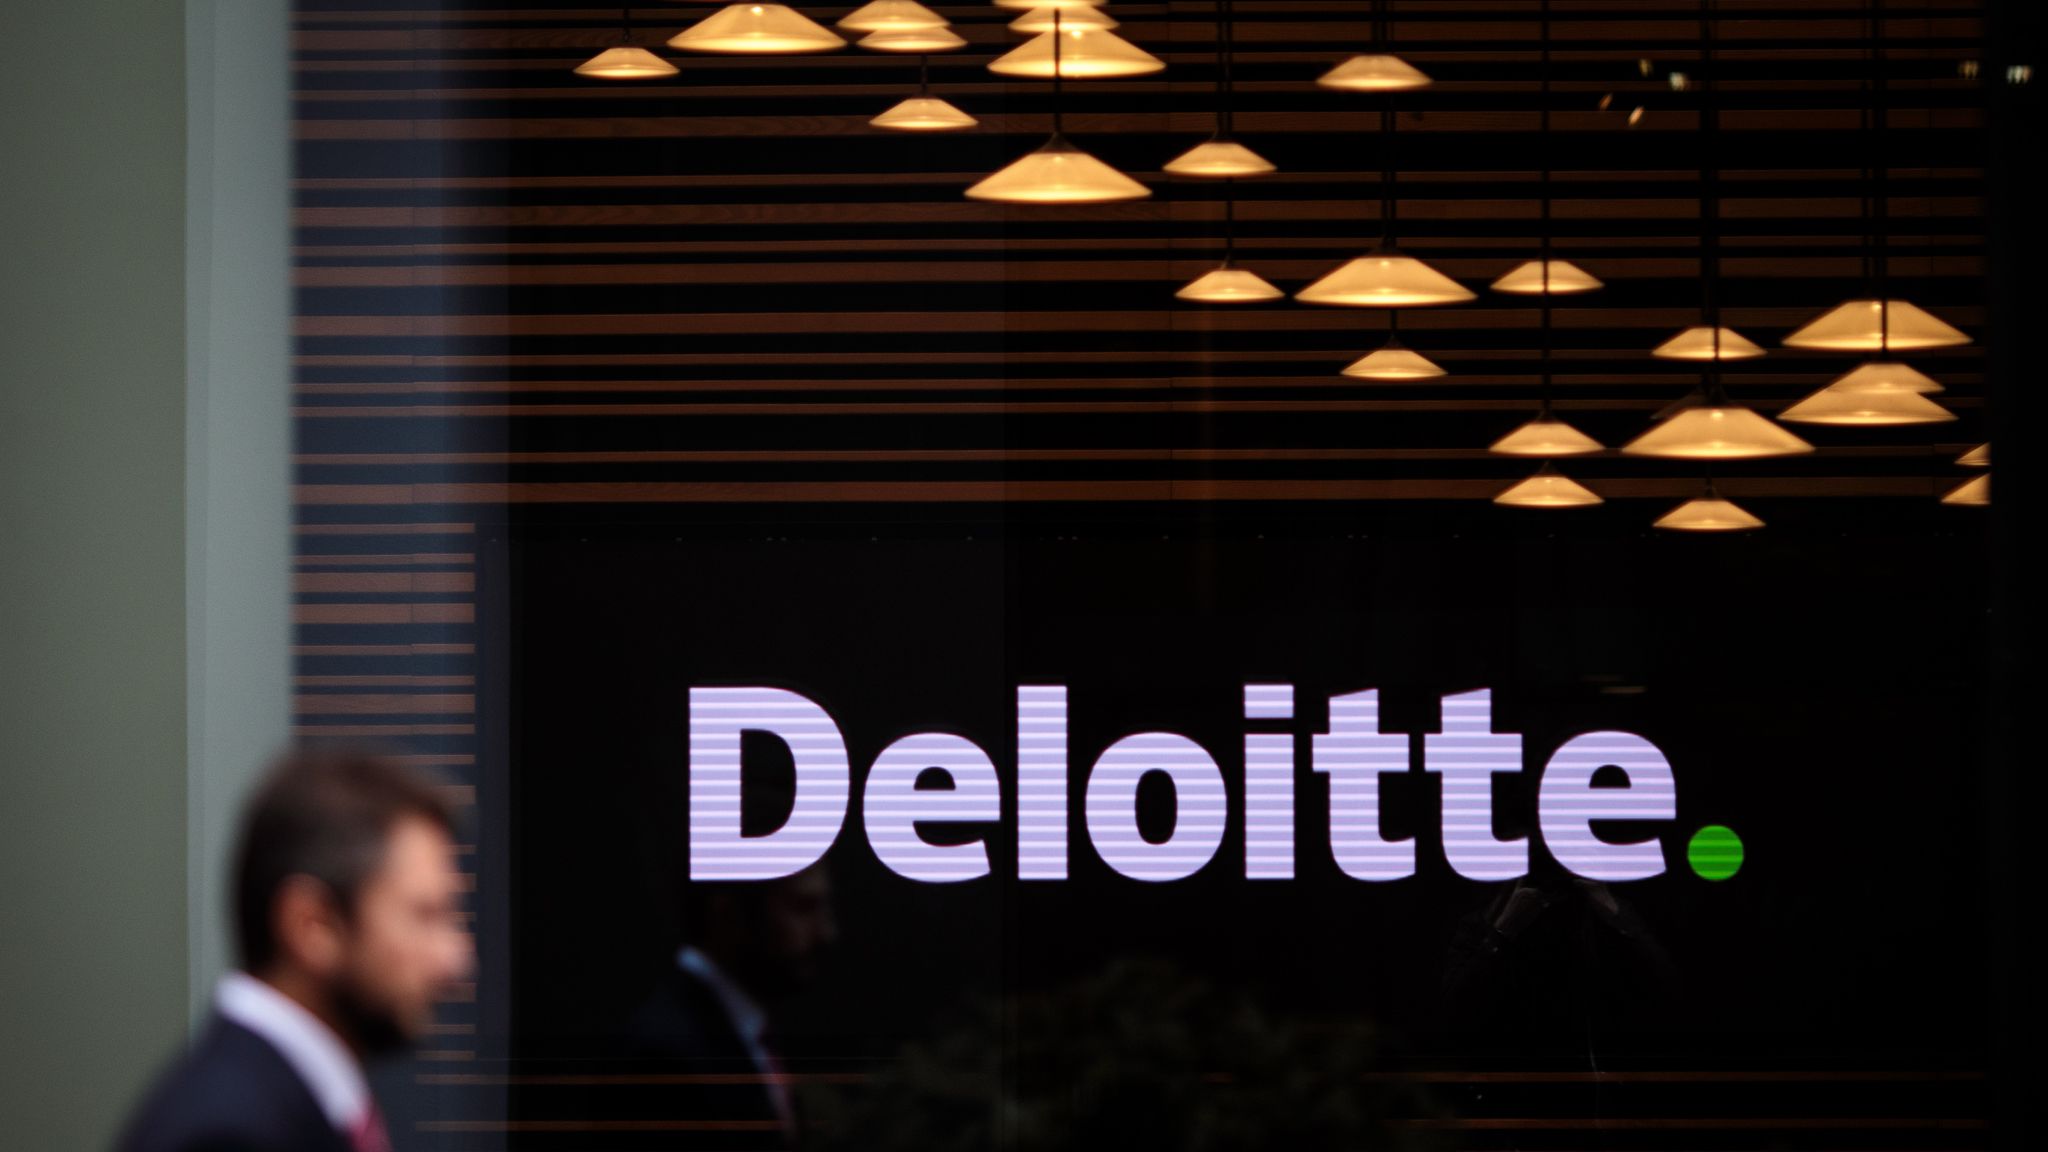 Consulting chief is frontrunner to lead Deloitte Business News Sky